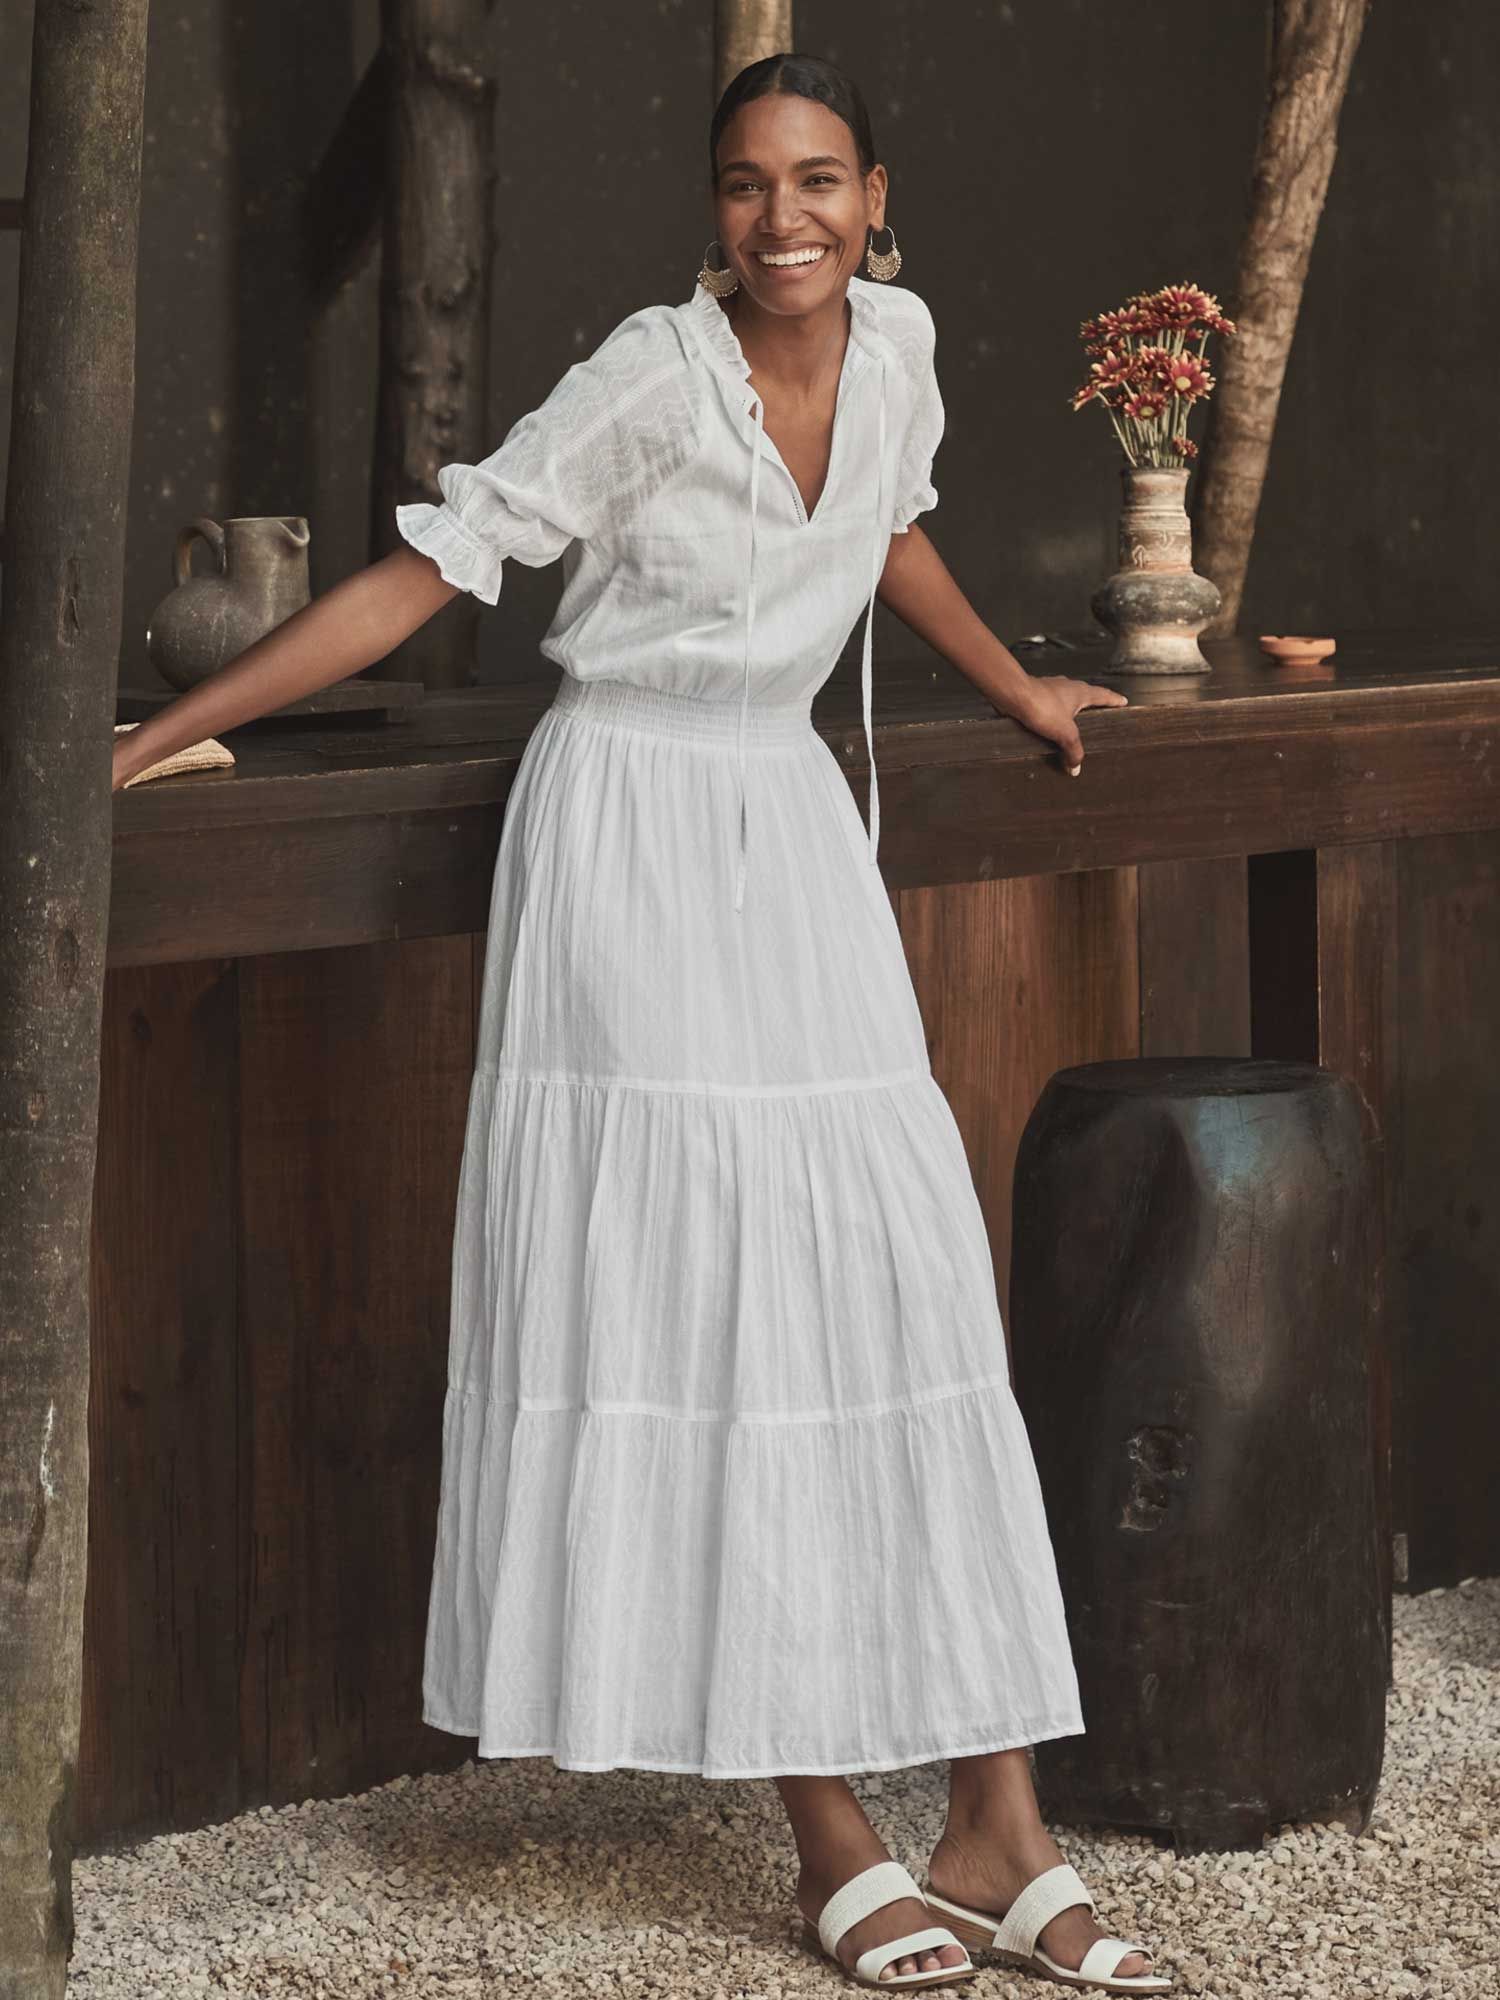 The White Company launches tiered dresses for summer